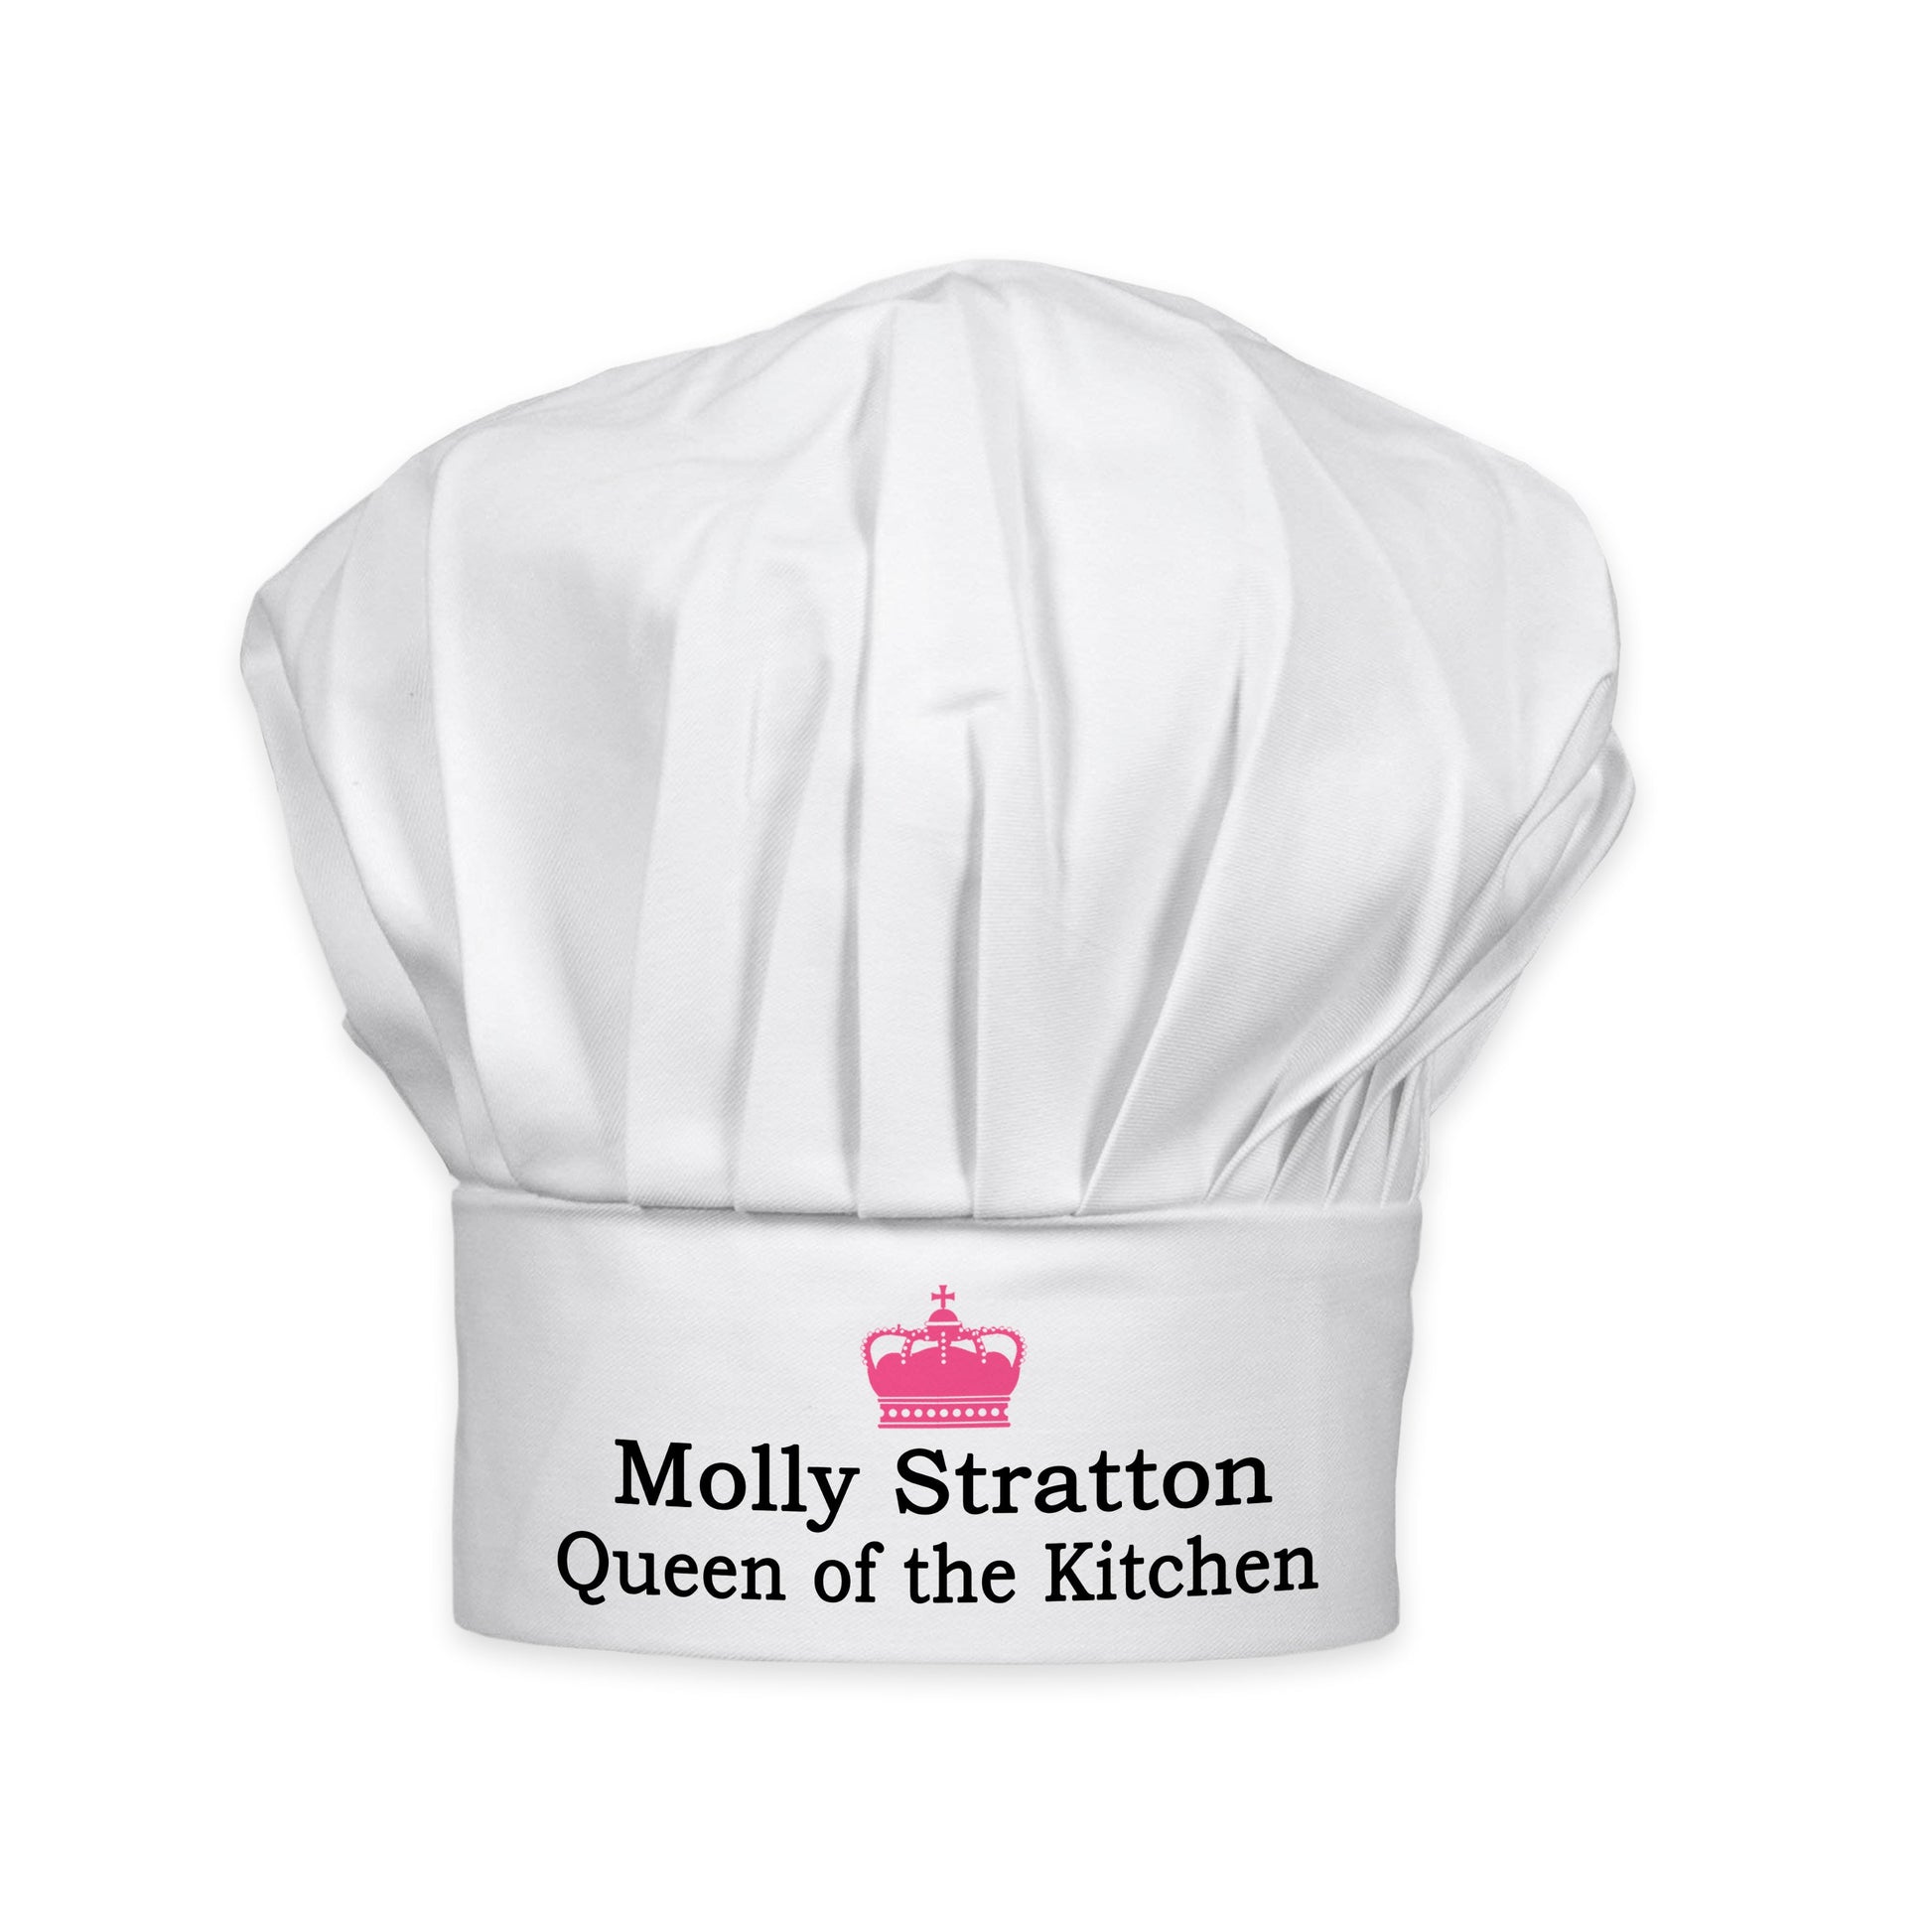 Personalized Chef Hats - Personalized Queen of the Kitchen Chef Hat 